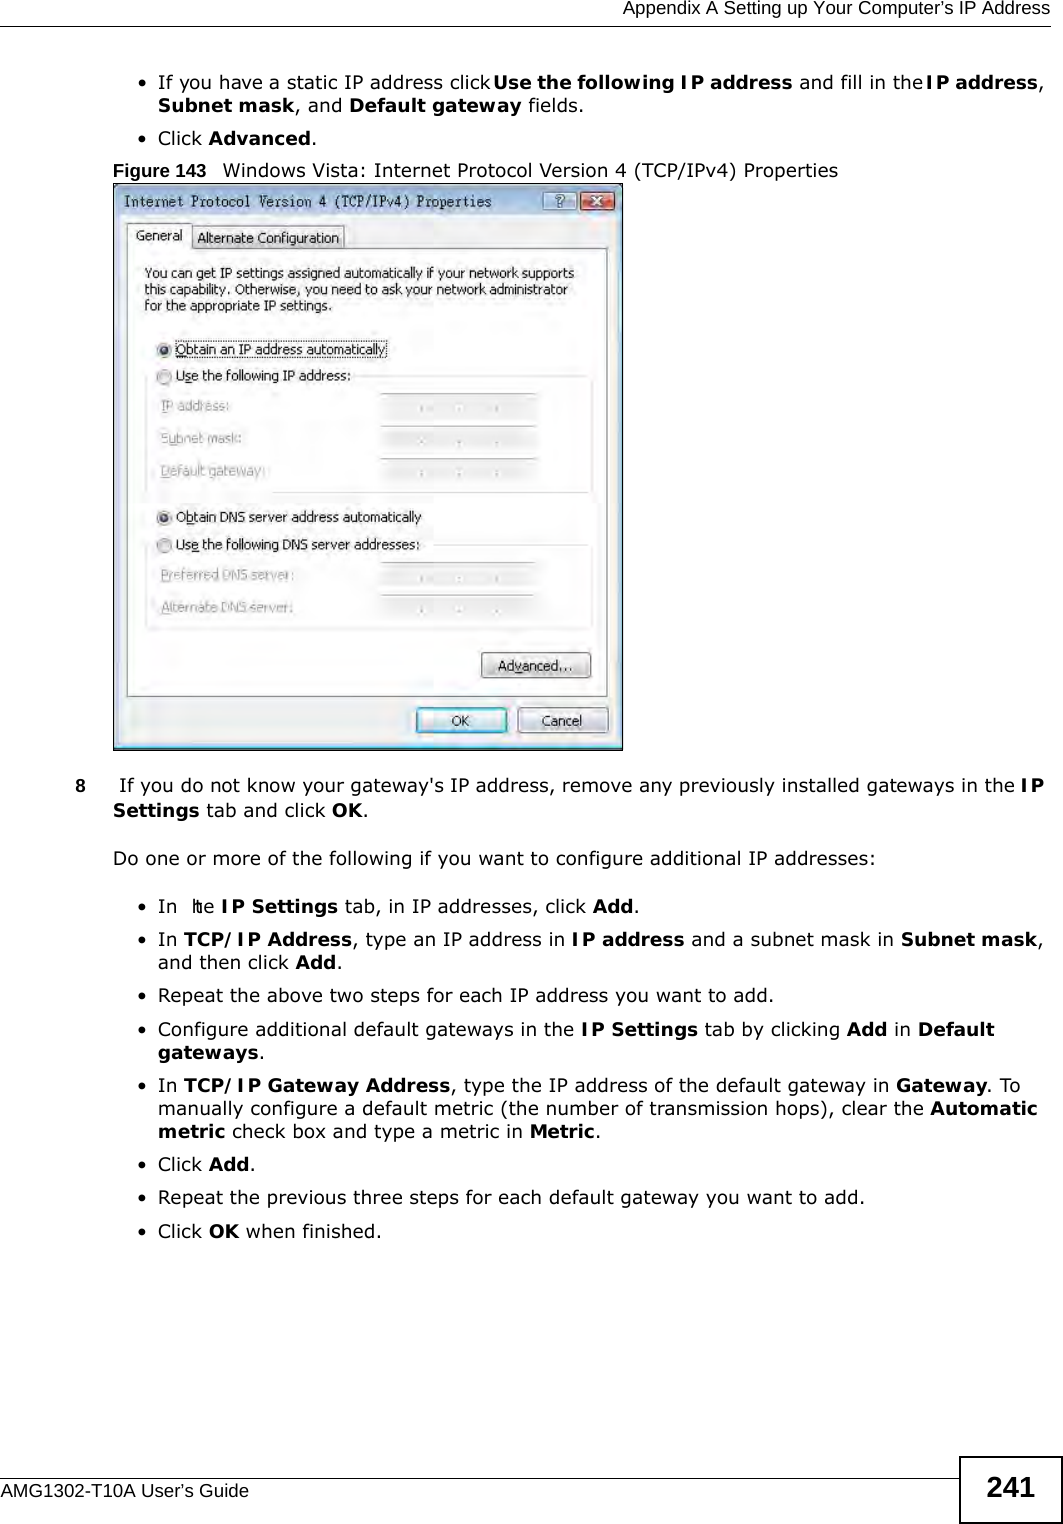  Appendix A Setting up Your Computer’s IP AddressAMG1302-T10A User’s Guide 241• If you have a static IP address click Use the following IP address and fill in the IP address, Subnet mask, and Default gateway fields. • Click Advanced.Figure 143   Windows Vista: Internet Protocol Version 4 (TCP/IPv4) Properties8 If you do not know your gateway&apos;s IP address, remove any previously installed gateways in the IP Settings tab and click OK.Do one or more of the following if you want to configure additional IP addresses:•In  the IP Settings tab, in IP addresses, click Add.•In TCP/IP Address, type an IP address in IP address and a subnet mask in Subnet mask, and then click Add.• Repeat the above two steps for each IP address you want to add.• Configure additional default gateways in the IP Settings tab by clicking Add in Default gateways.•In TCP/IP Gateway Address, type the IP address of the default gateway in Gateway. To manually configure a default metric (the number of transmission hops), clear the Automatic metric check box and type a metric in Metric.• Click Add. • Repeat the previous three steps for each default gateway you want to add.• Click OK when finished.